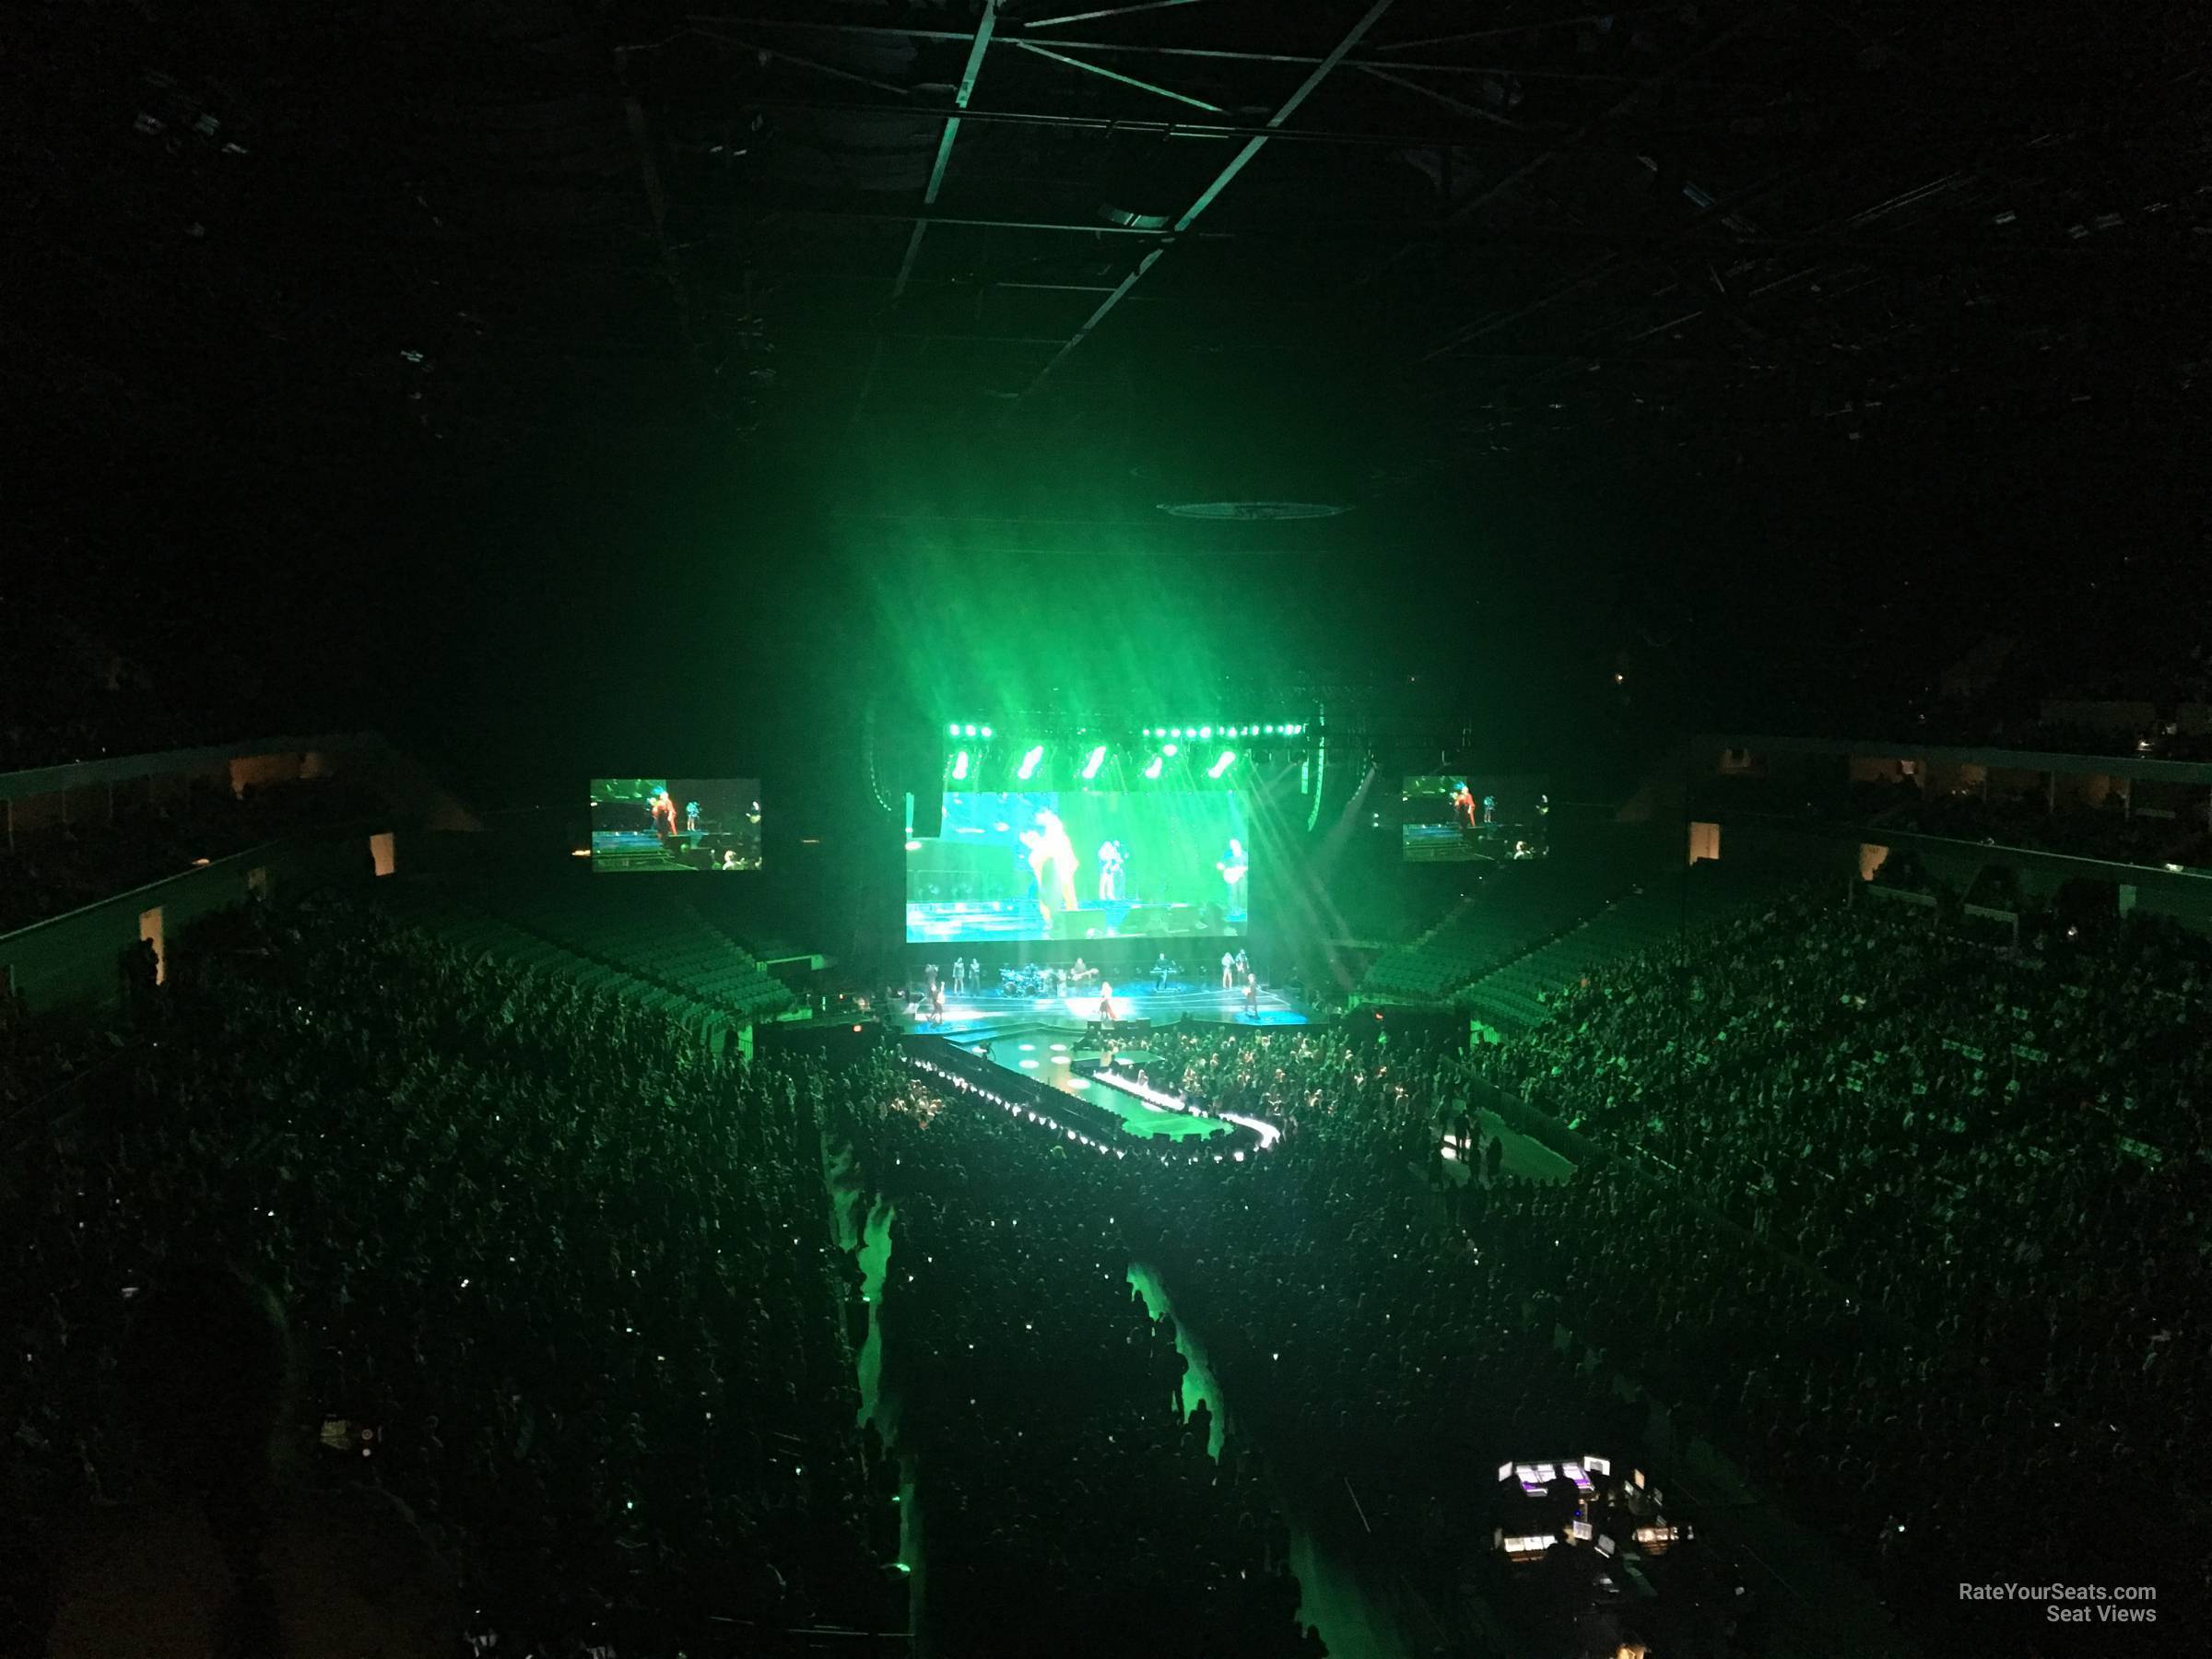 head-on concert view at BOK Center